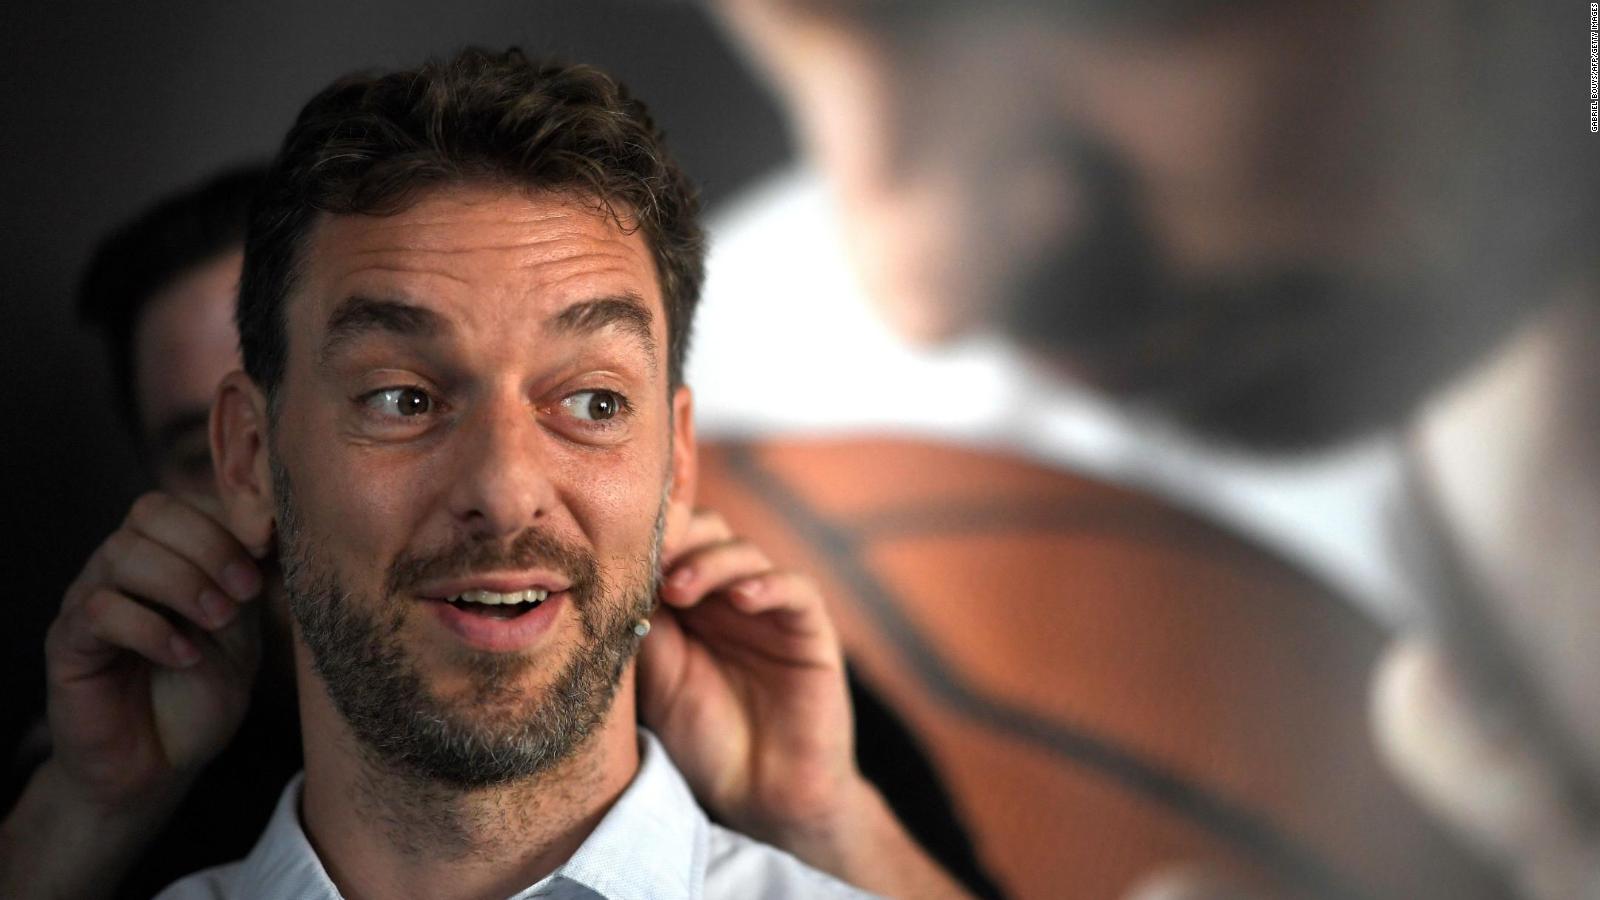 Pau Gasol: Spanish basketball star on helping others after retirement